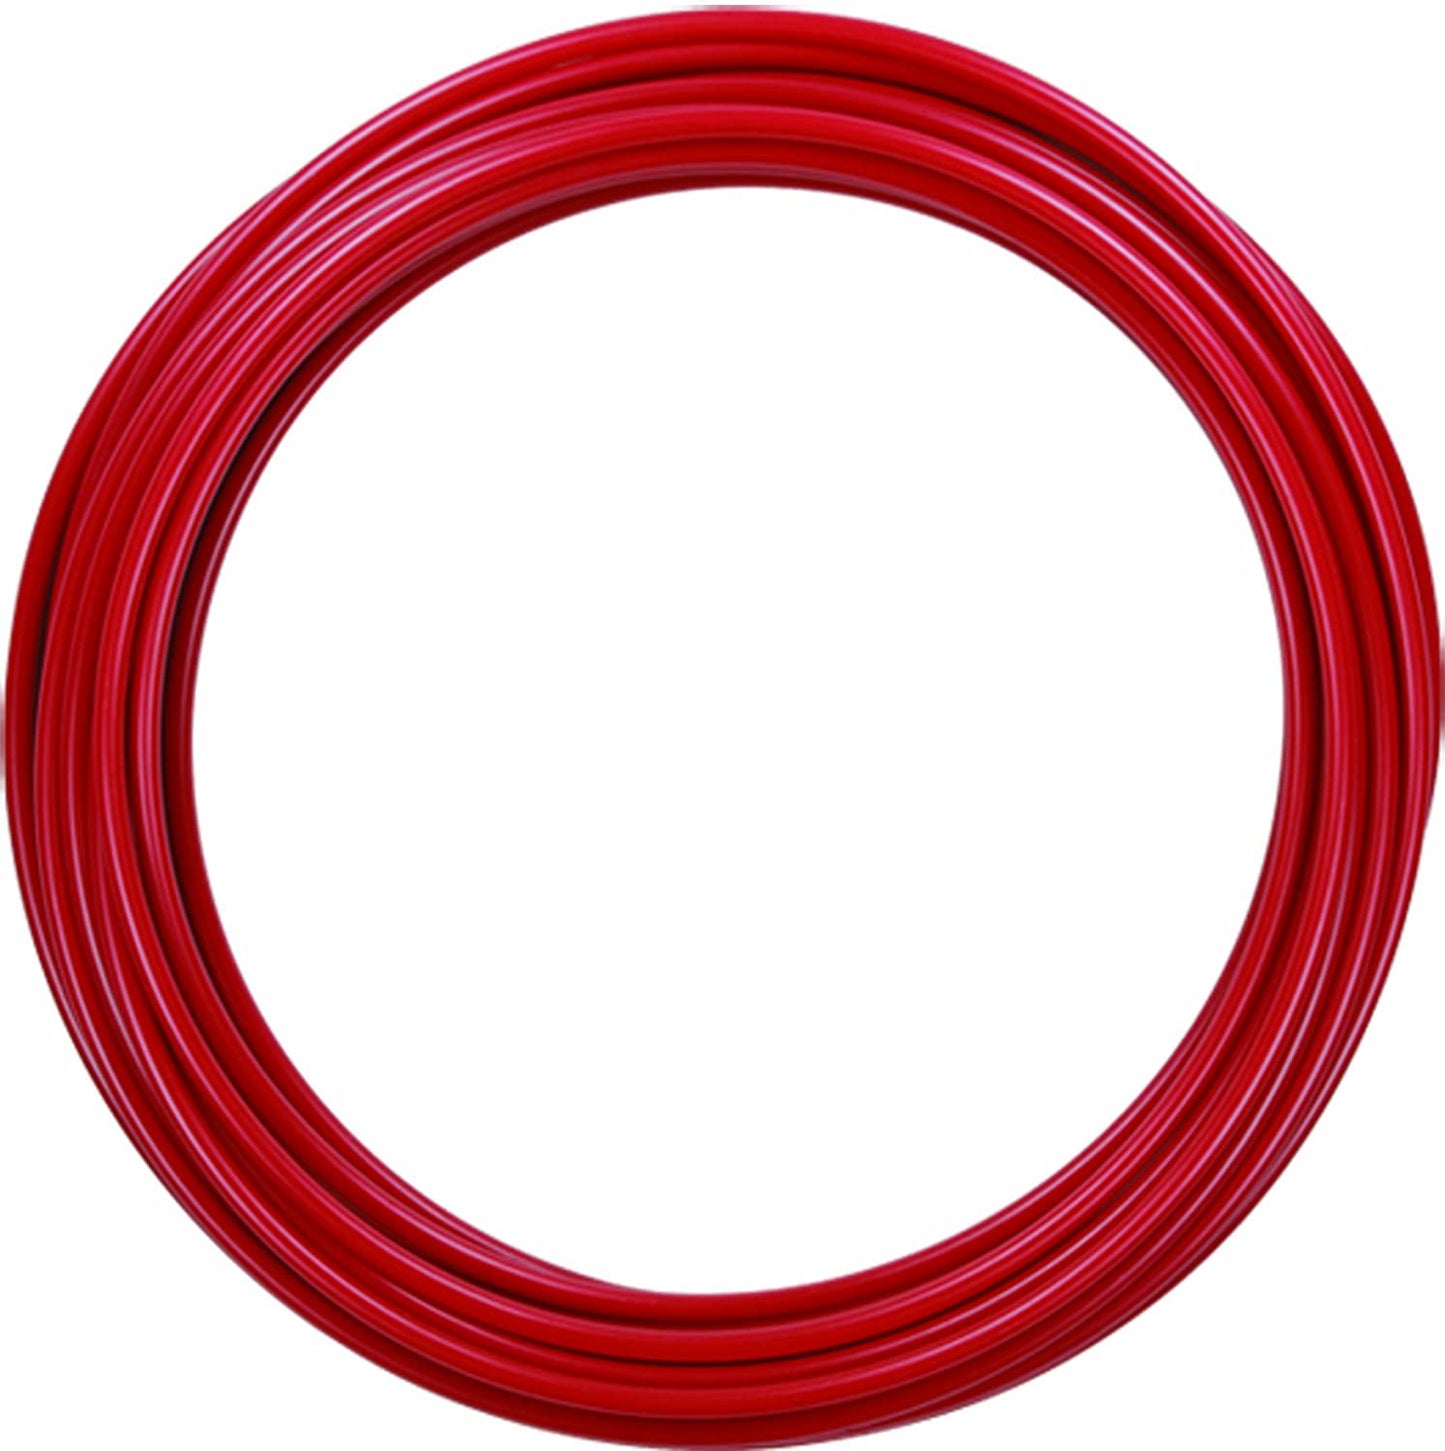 32143 PureFlow Zero Lead ViegaPEX Tubing with Red Coil of Dimension 3/4" by 300-Feet